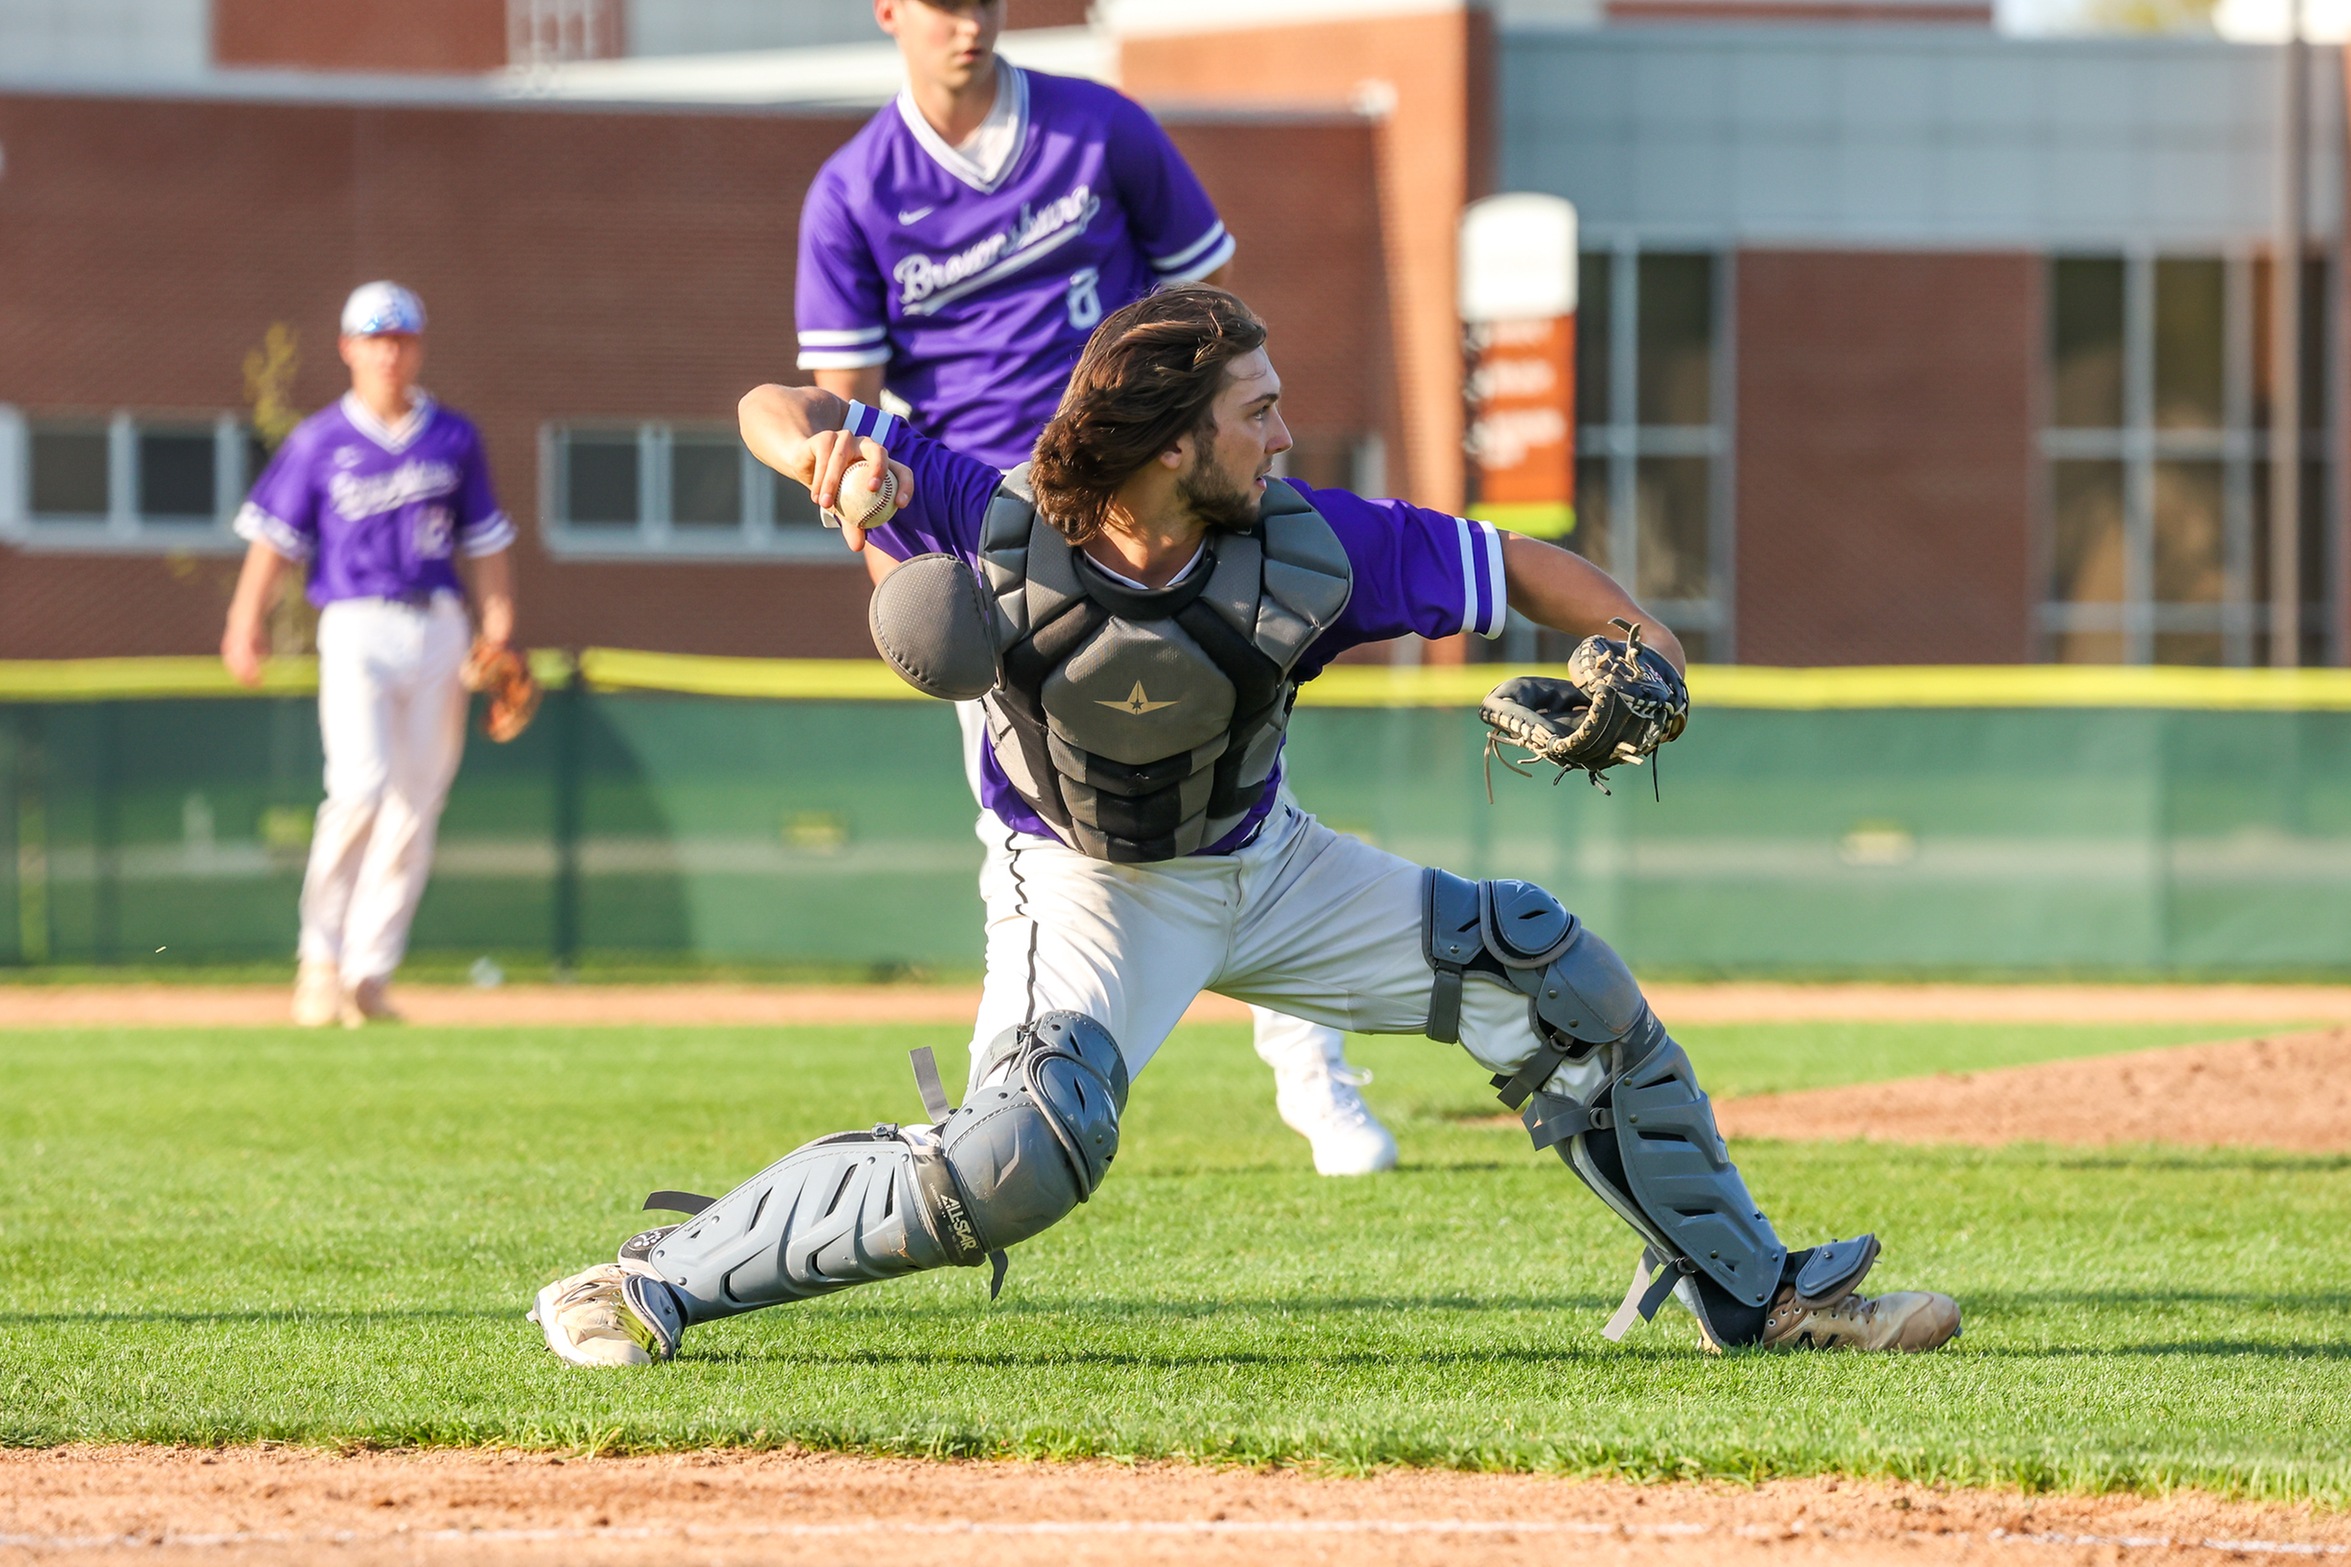 Baseball Shuts Out Noblesville Millers to Sweep the Series, 9-0